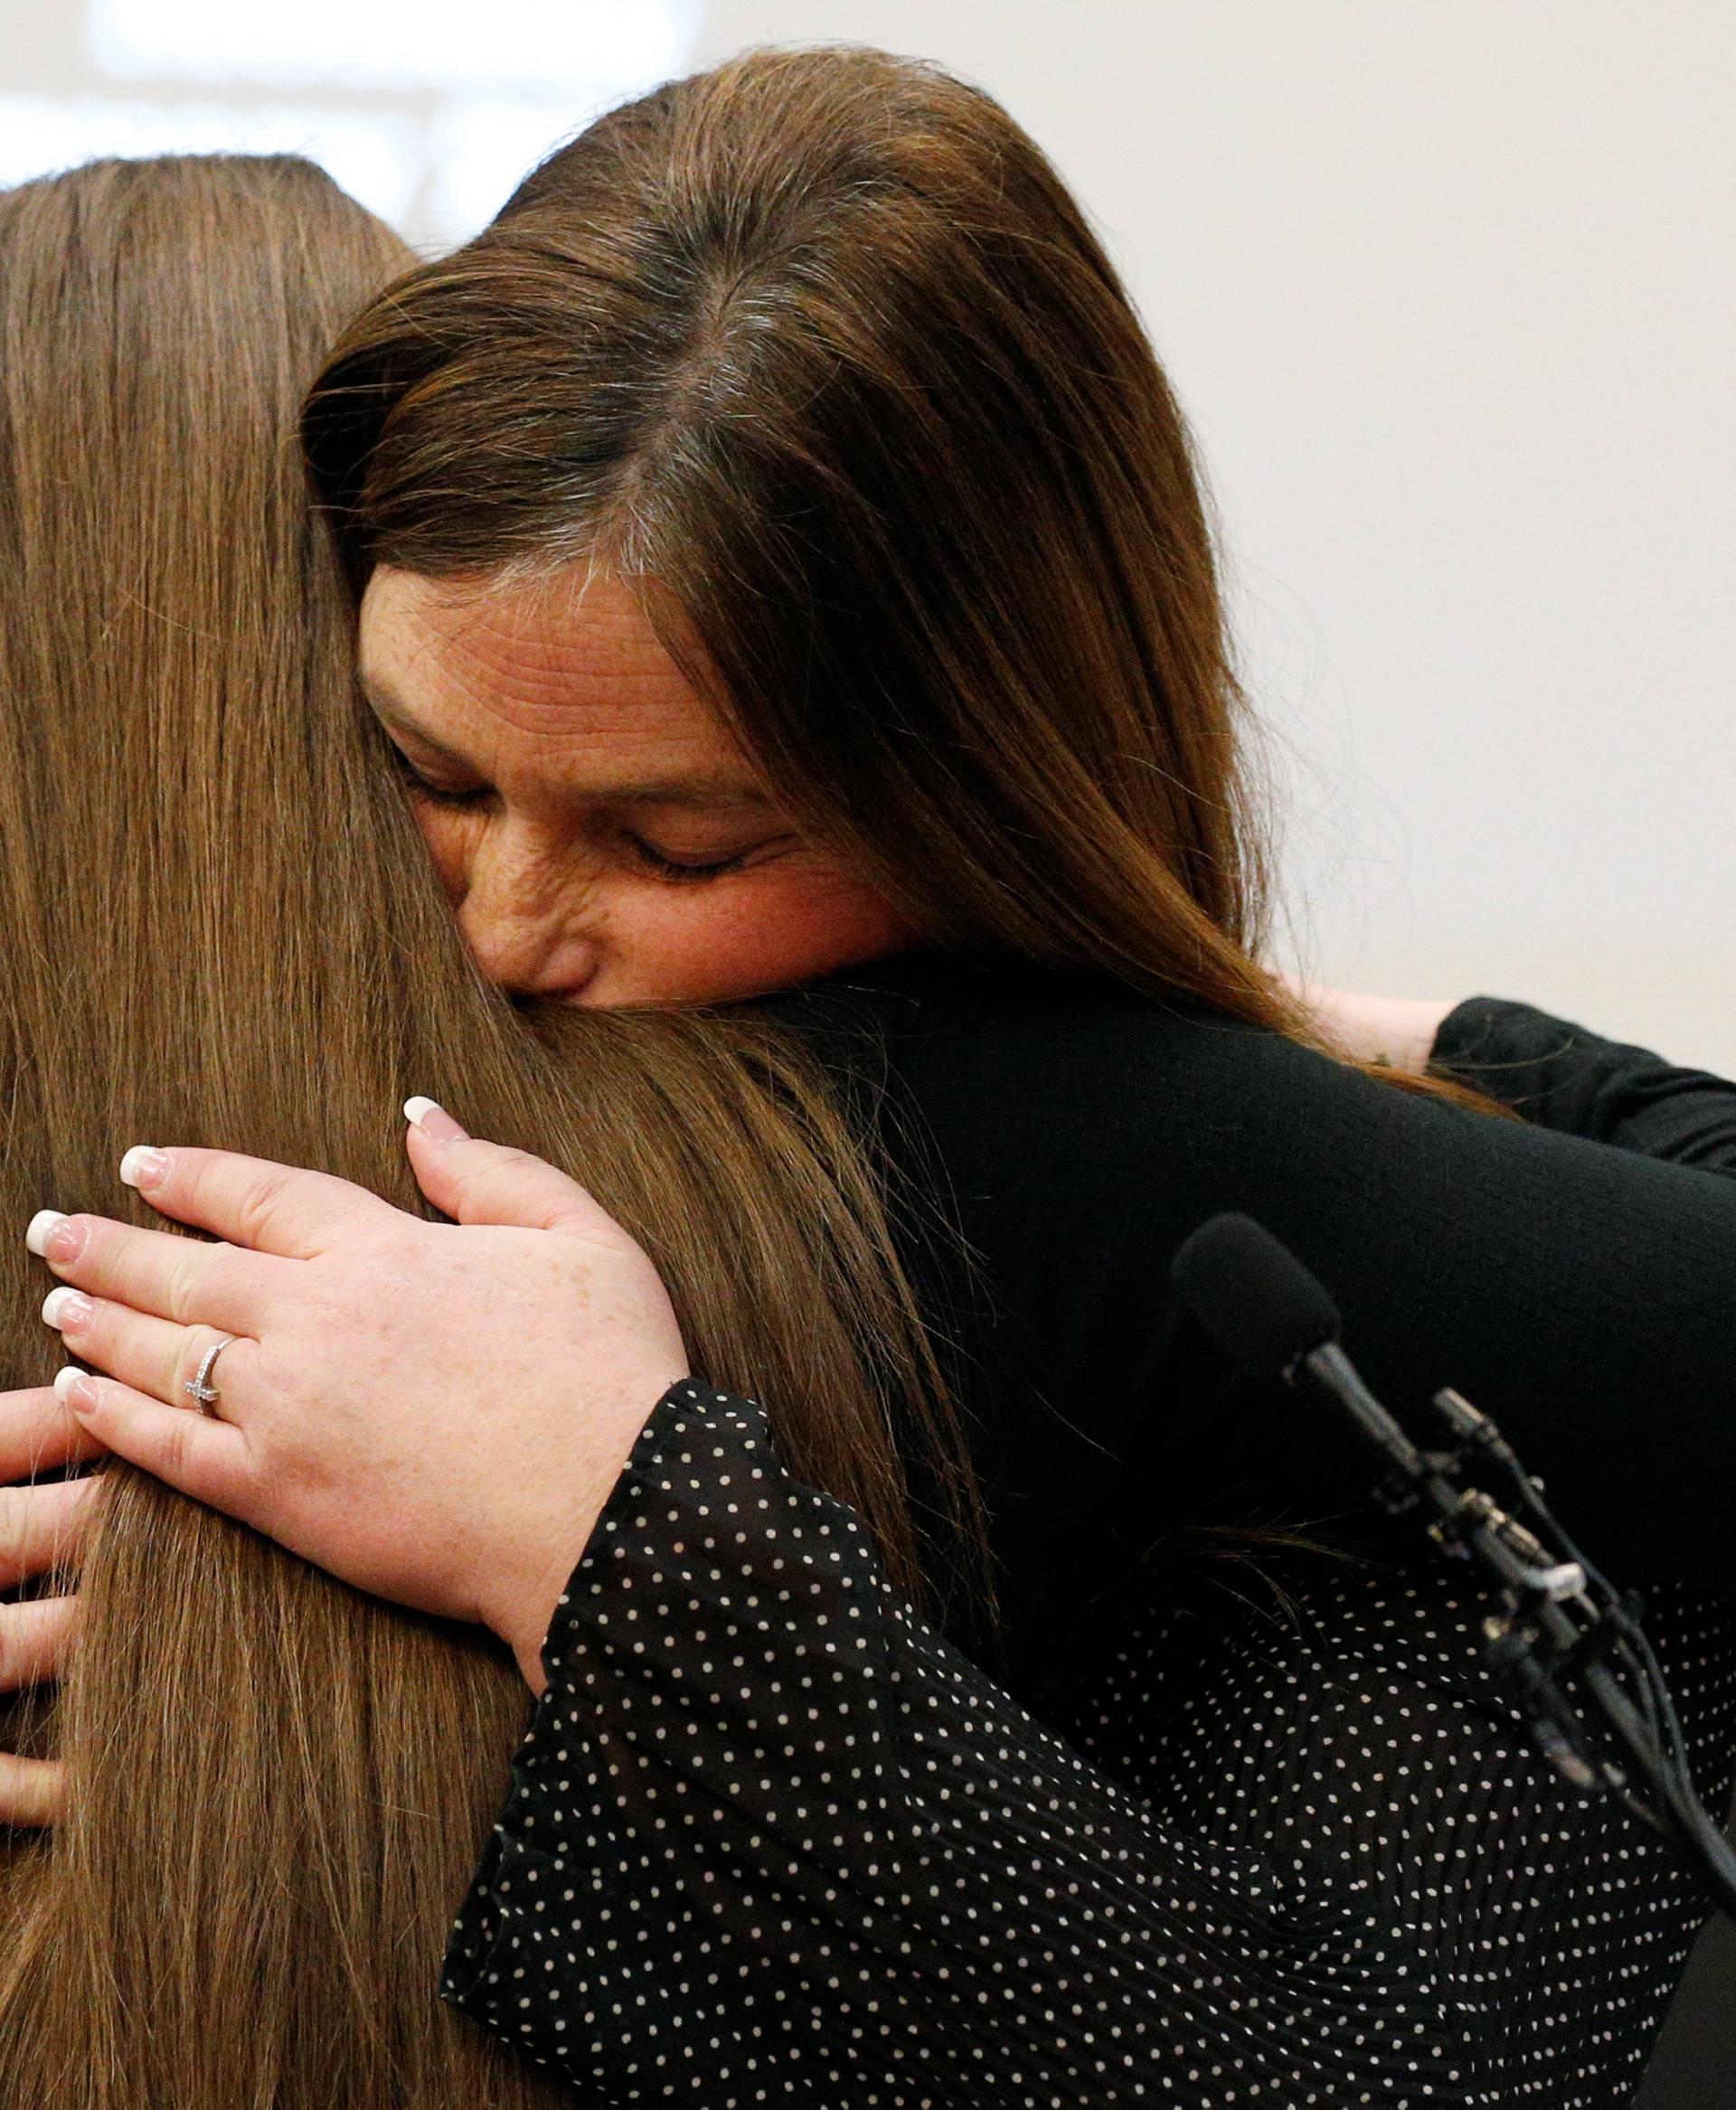 Victim Emma Ann Miller is embraced by her mother Leslie Miller at the sentencing hearing for Larry Nassar, a former team USA Gymnastics doctor who pleaded guilty in November 2017 to sexual assault charges, in Lansing